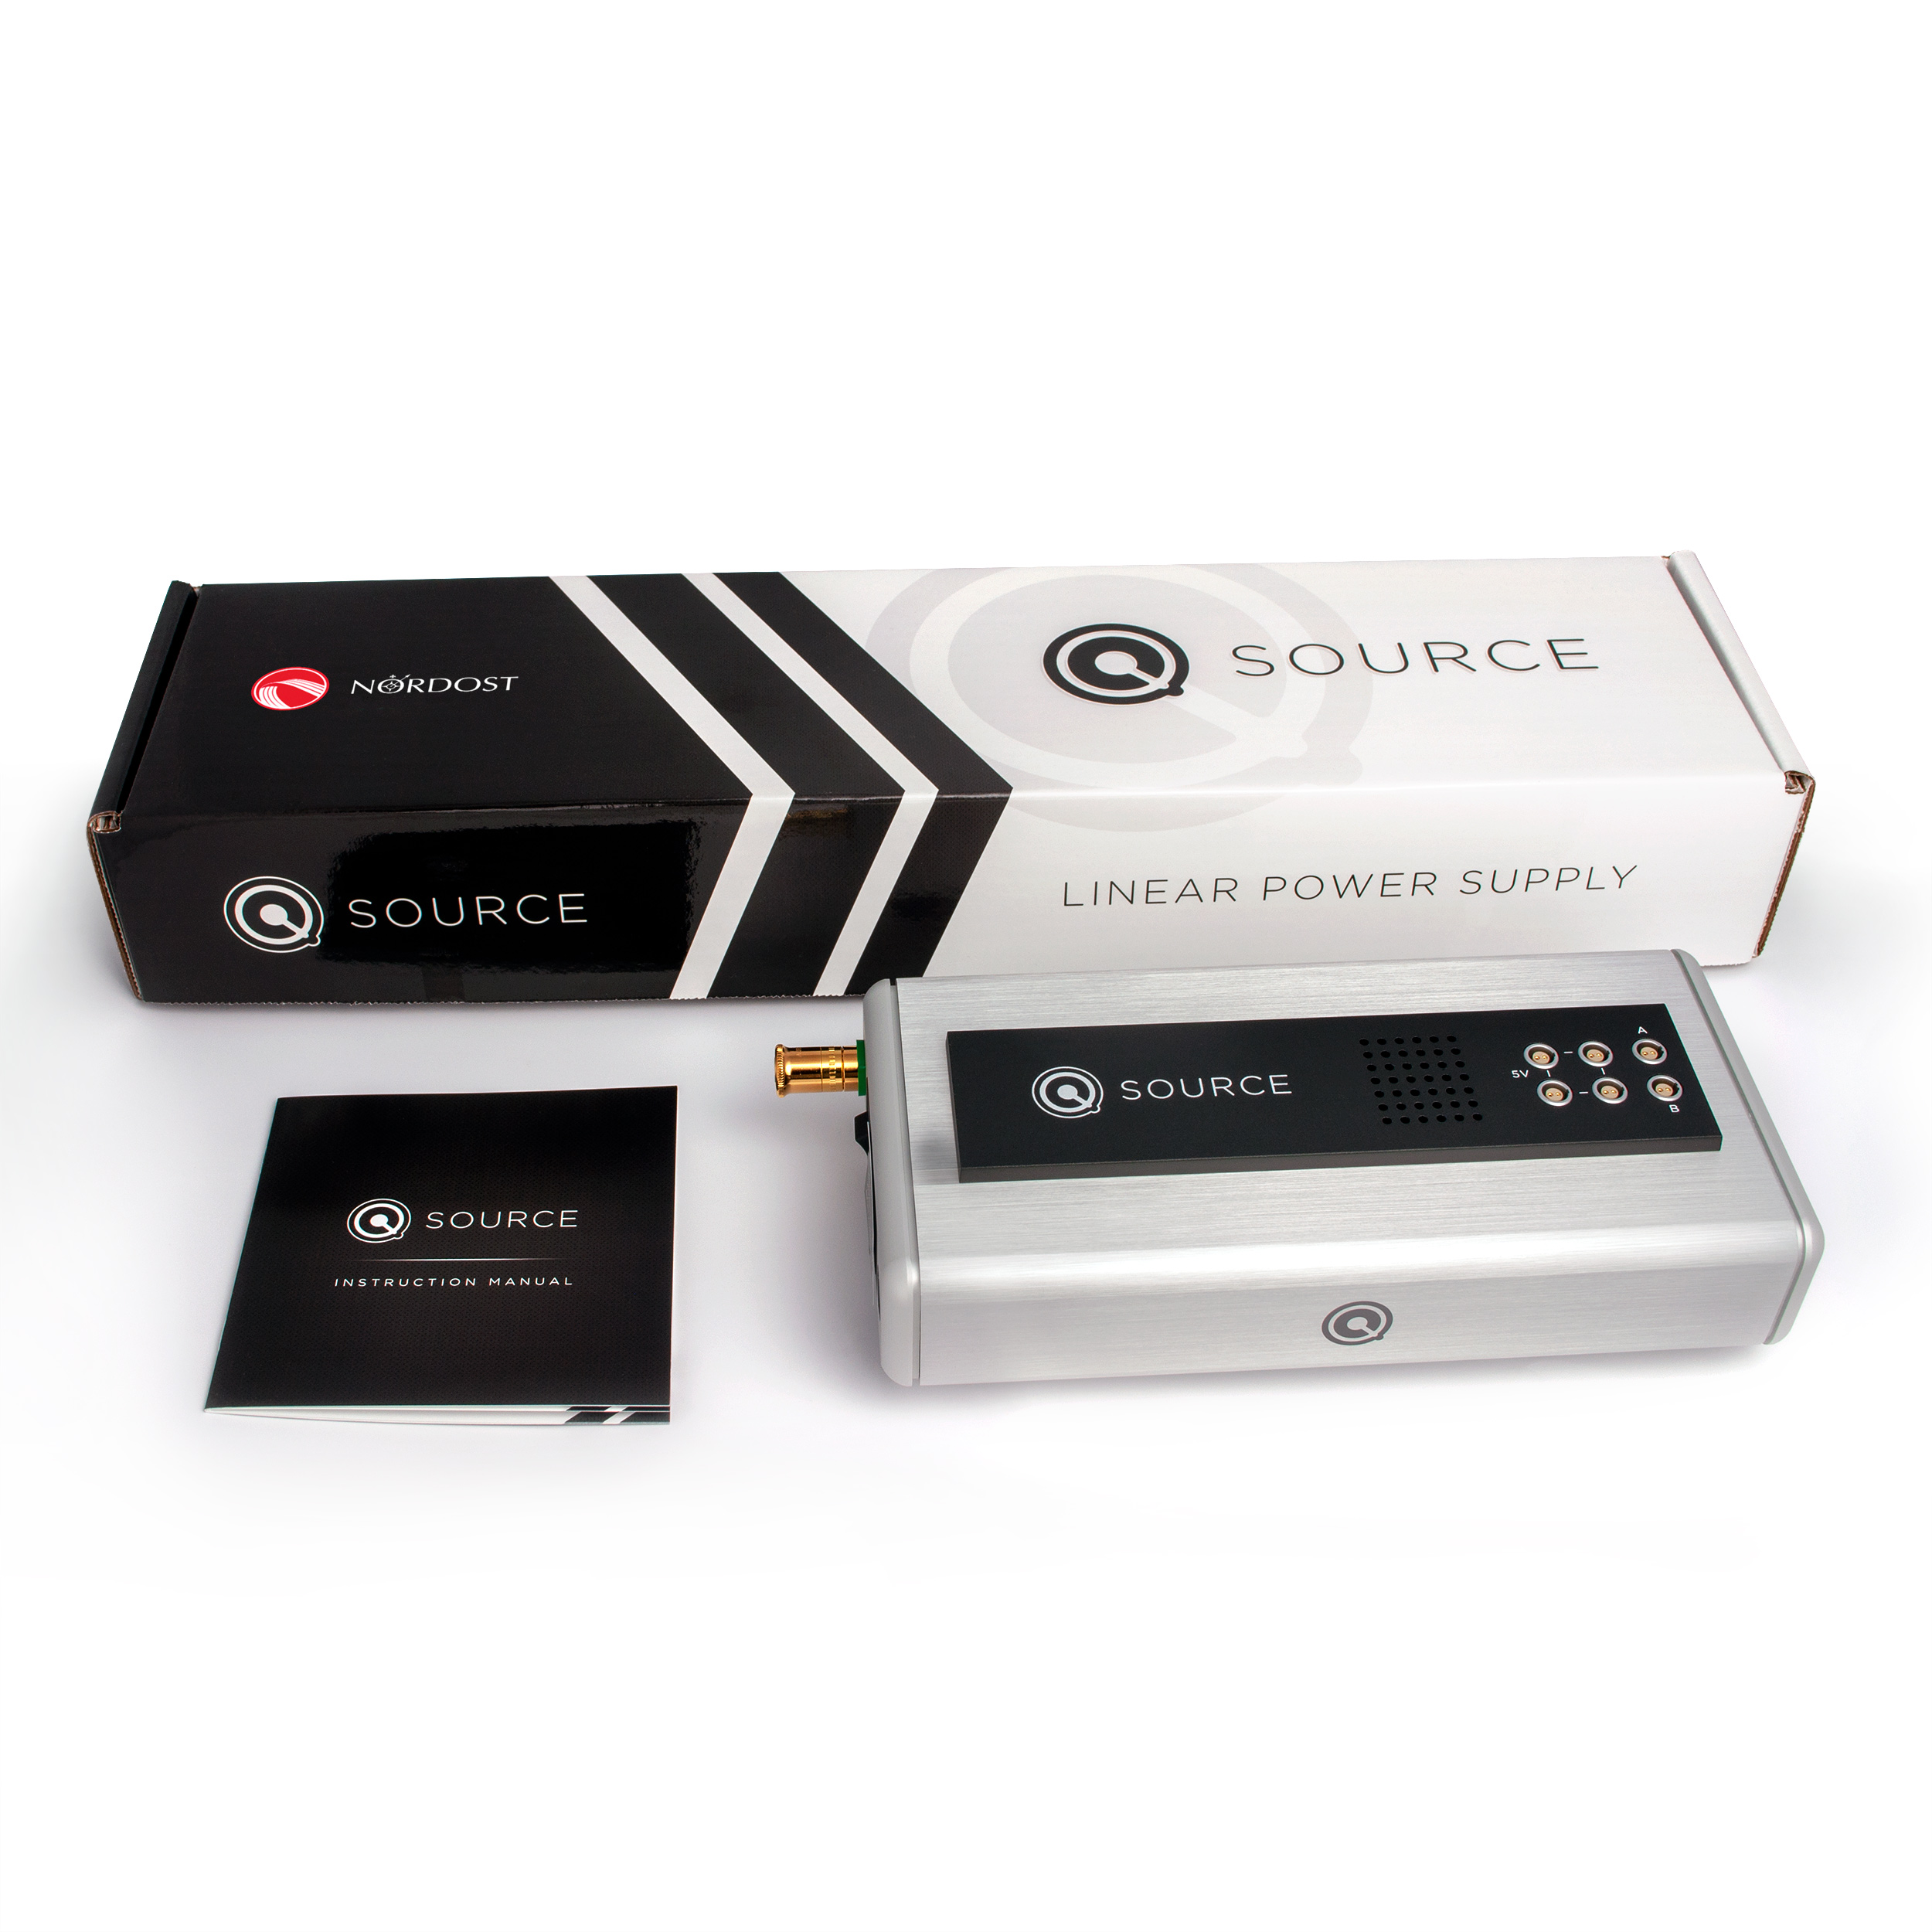 Nordost QSOURCE LINEAR POWER SUPPLY